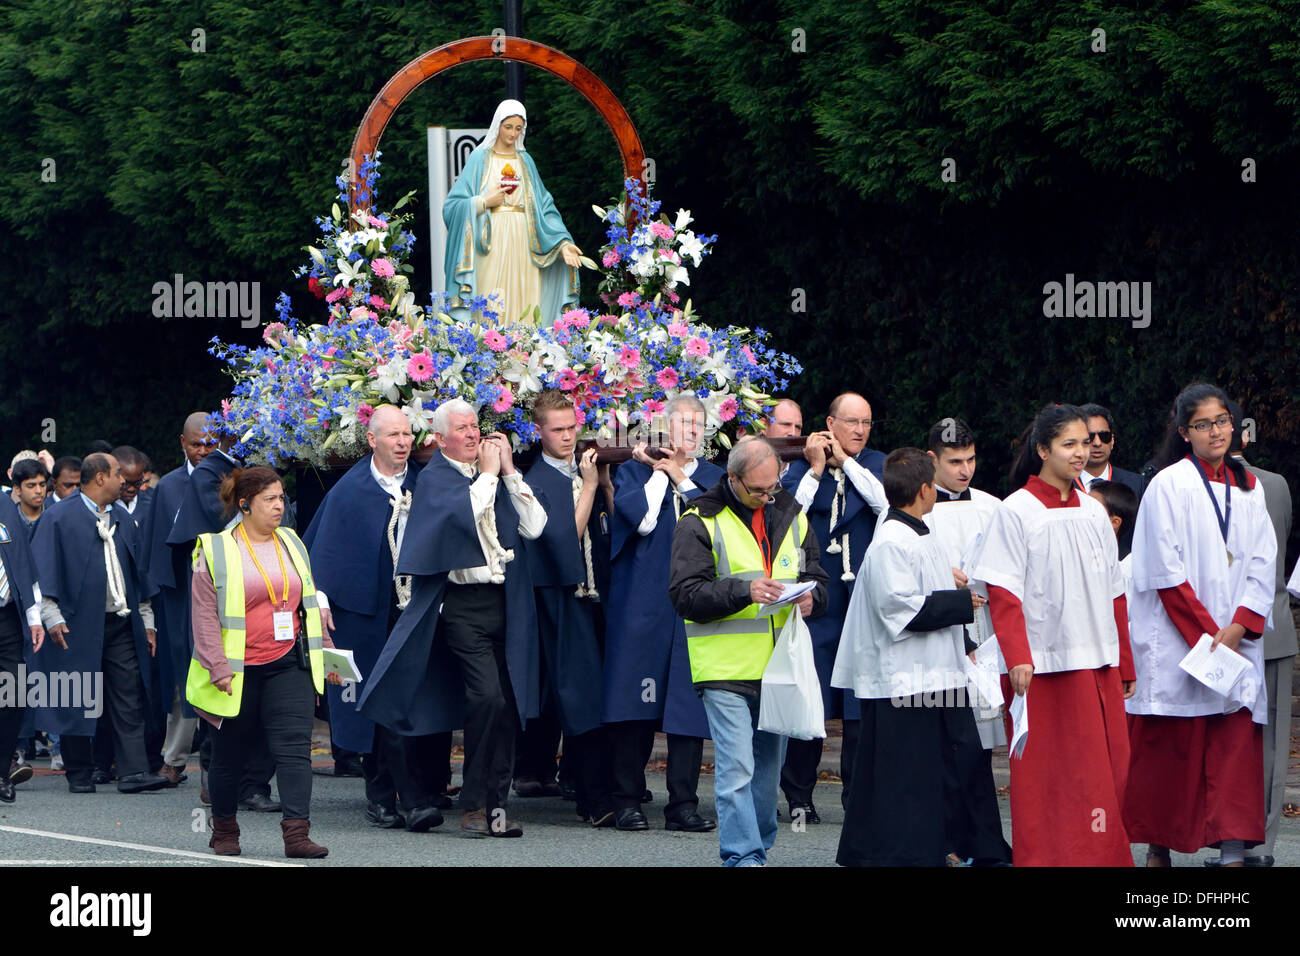 Marian Procession  Manchester, UK  05 October 2013 An estimated thousand Catholics walk through South Manchester, praying the rosary and singing hymns as a visible expression of their faith. The procession starts at St Edward's Church, Rusholme and goes along Wilmslow Road to Fallowfield before going into Platts Fields Park for a short service. Credit:  John Fryer/Alamy Live News Stock Photo